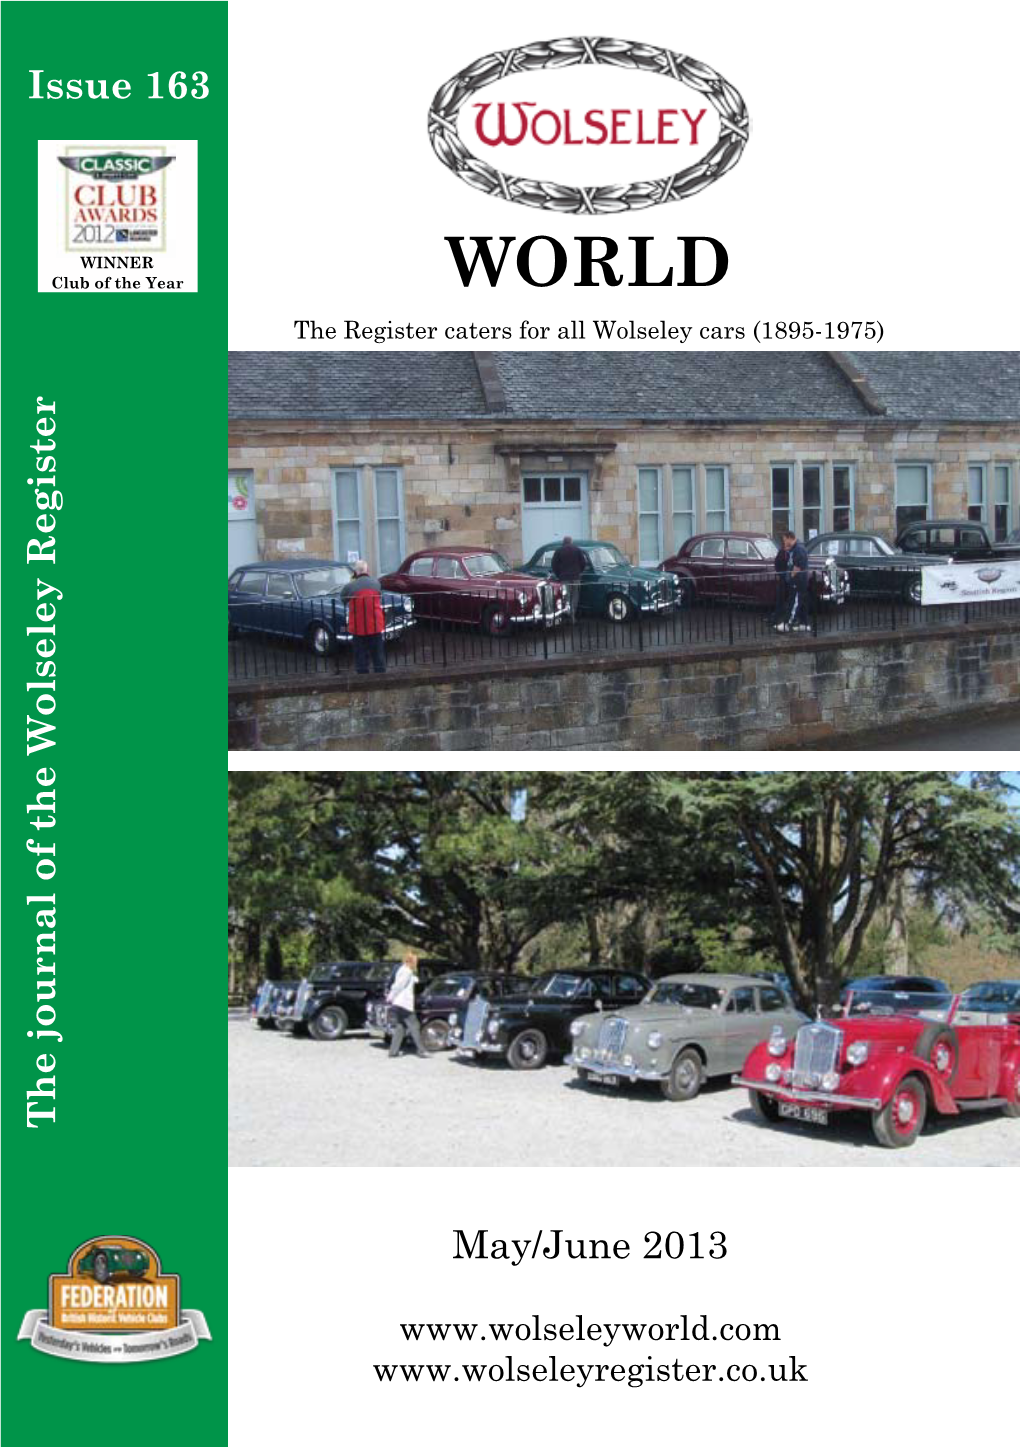 May/June 2013 the Journal of the Wolseley Register Issue